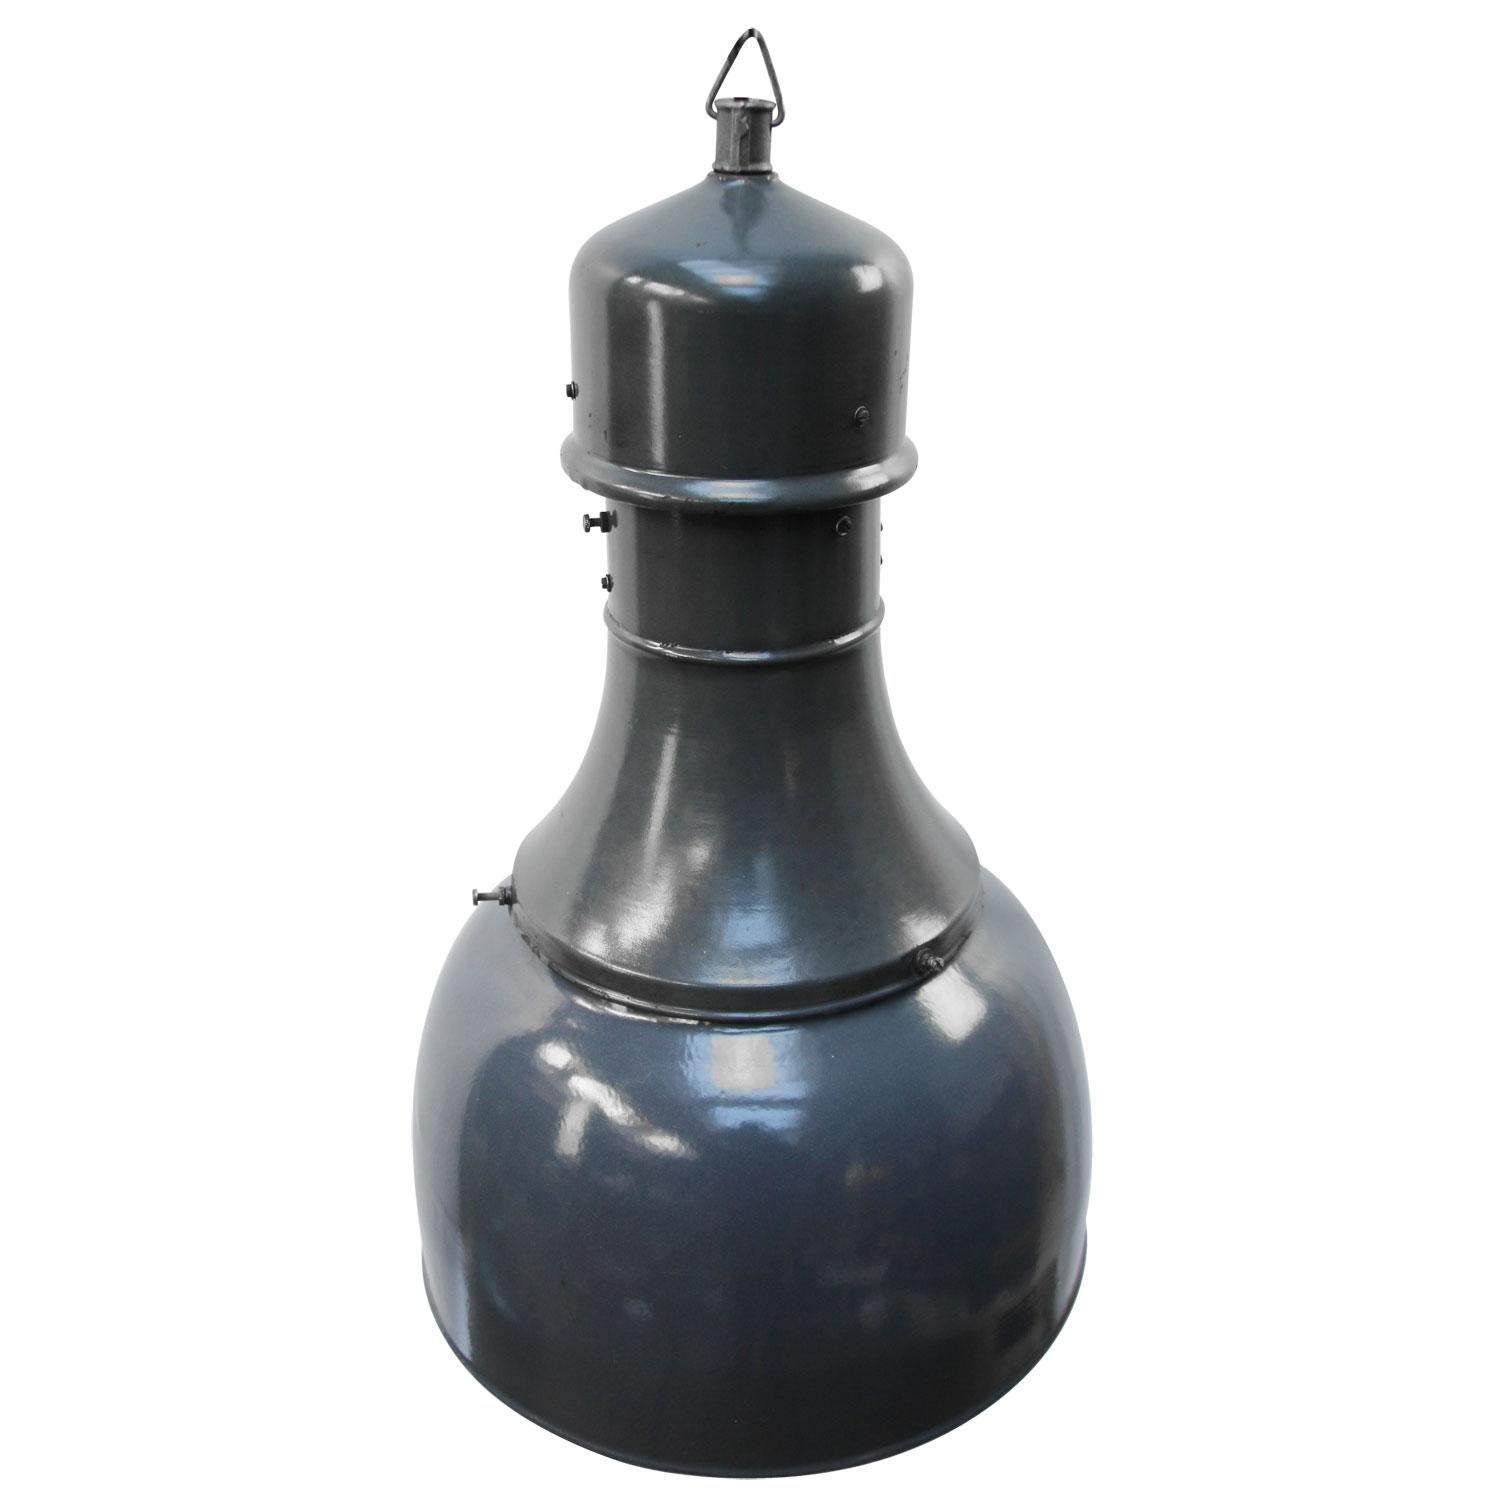 Tall blue enamel factory pendants. White interior cast iron top.

Weight: 4.9 kg / 10.8 lb

Priced per individual item. All lamps have been made suitable by international standards for incandescent light bulbs, energy-efficient and LED bulbs.